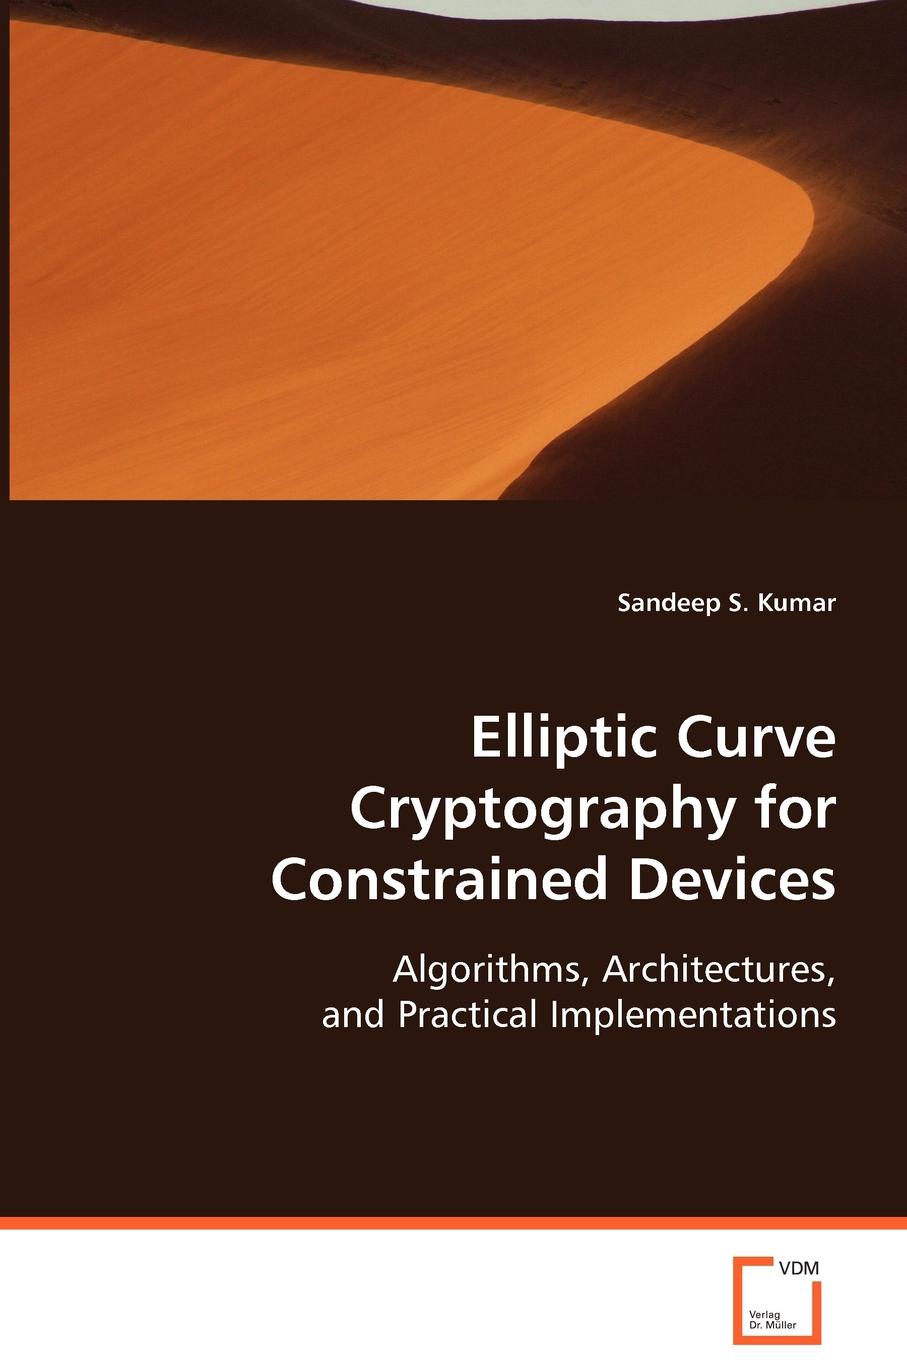 Elliptic Curve Cryptography for Constrained Devices